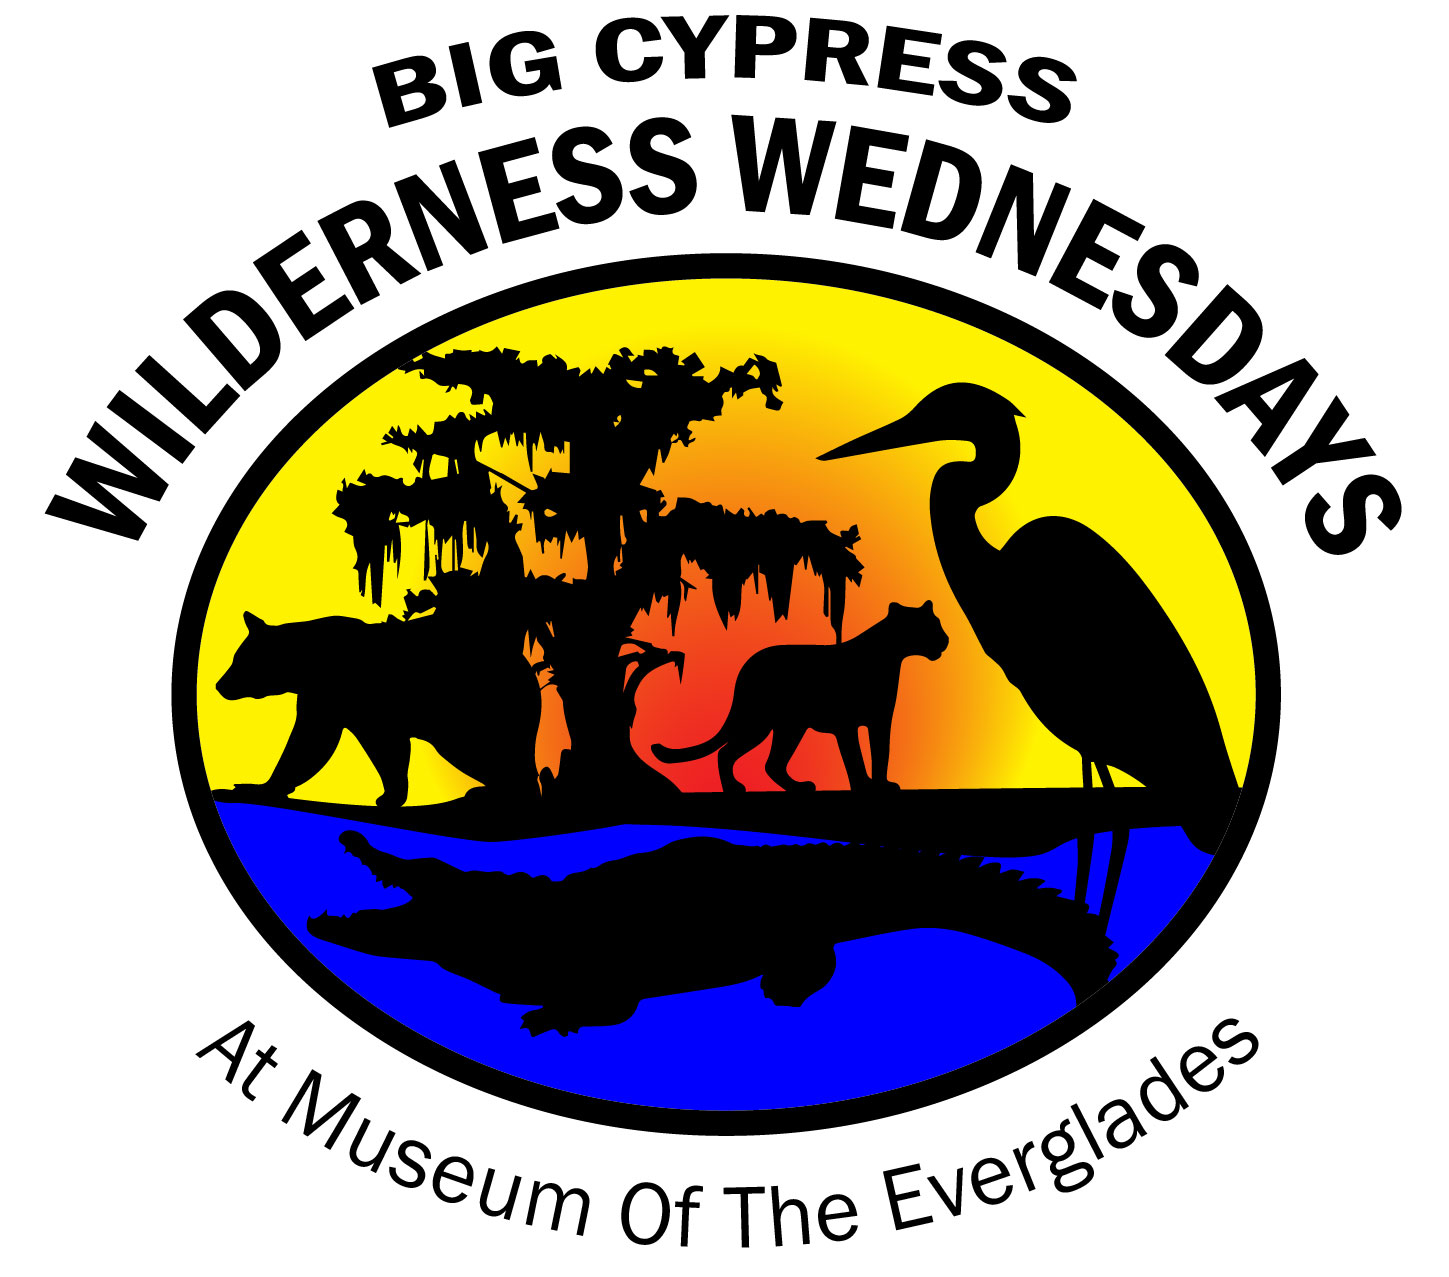 "Big Cypress Wilderness Wednesdays at Museum of the Everglades" logo of silhouetted animals against a sunset